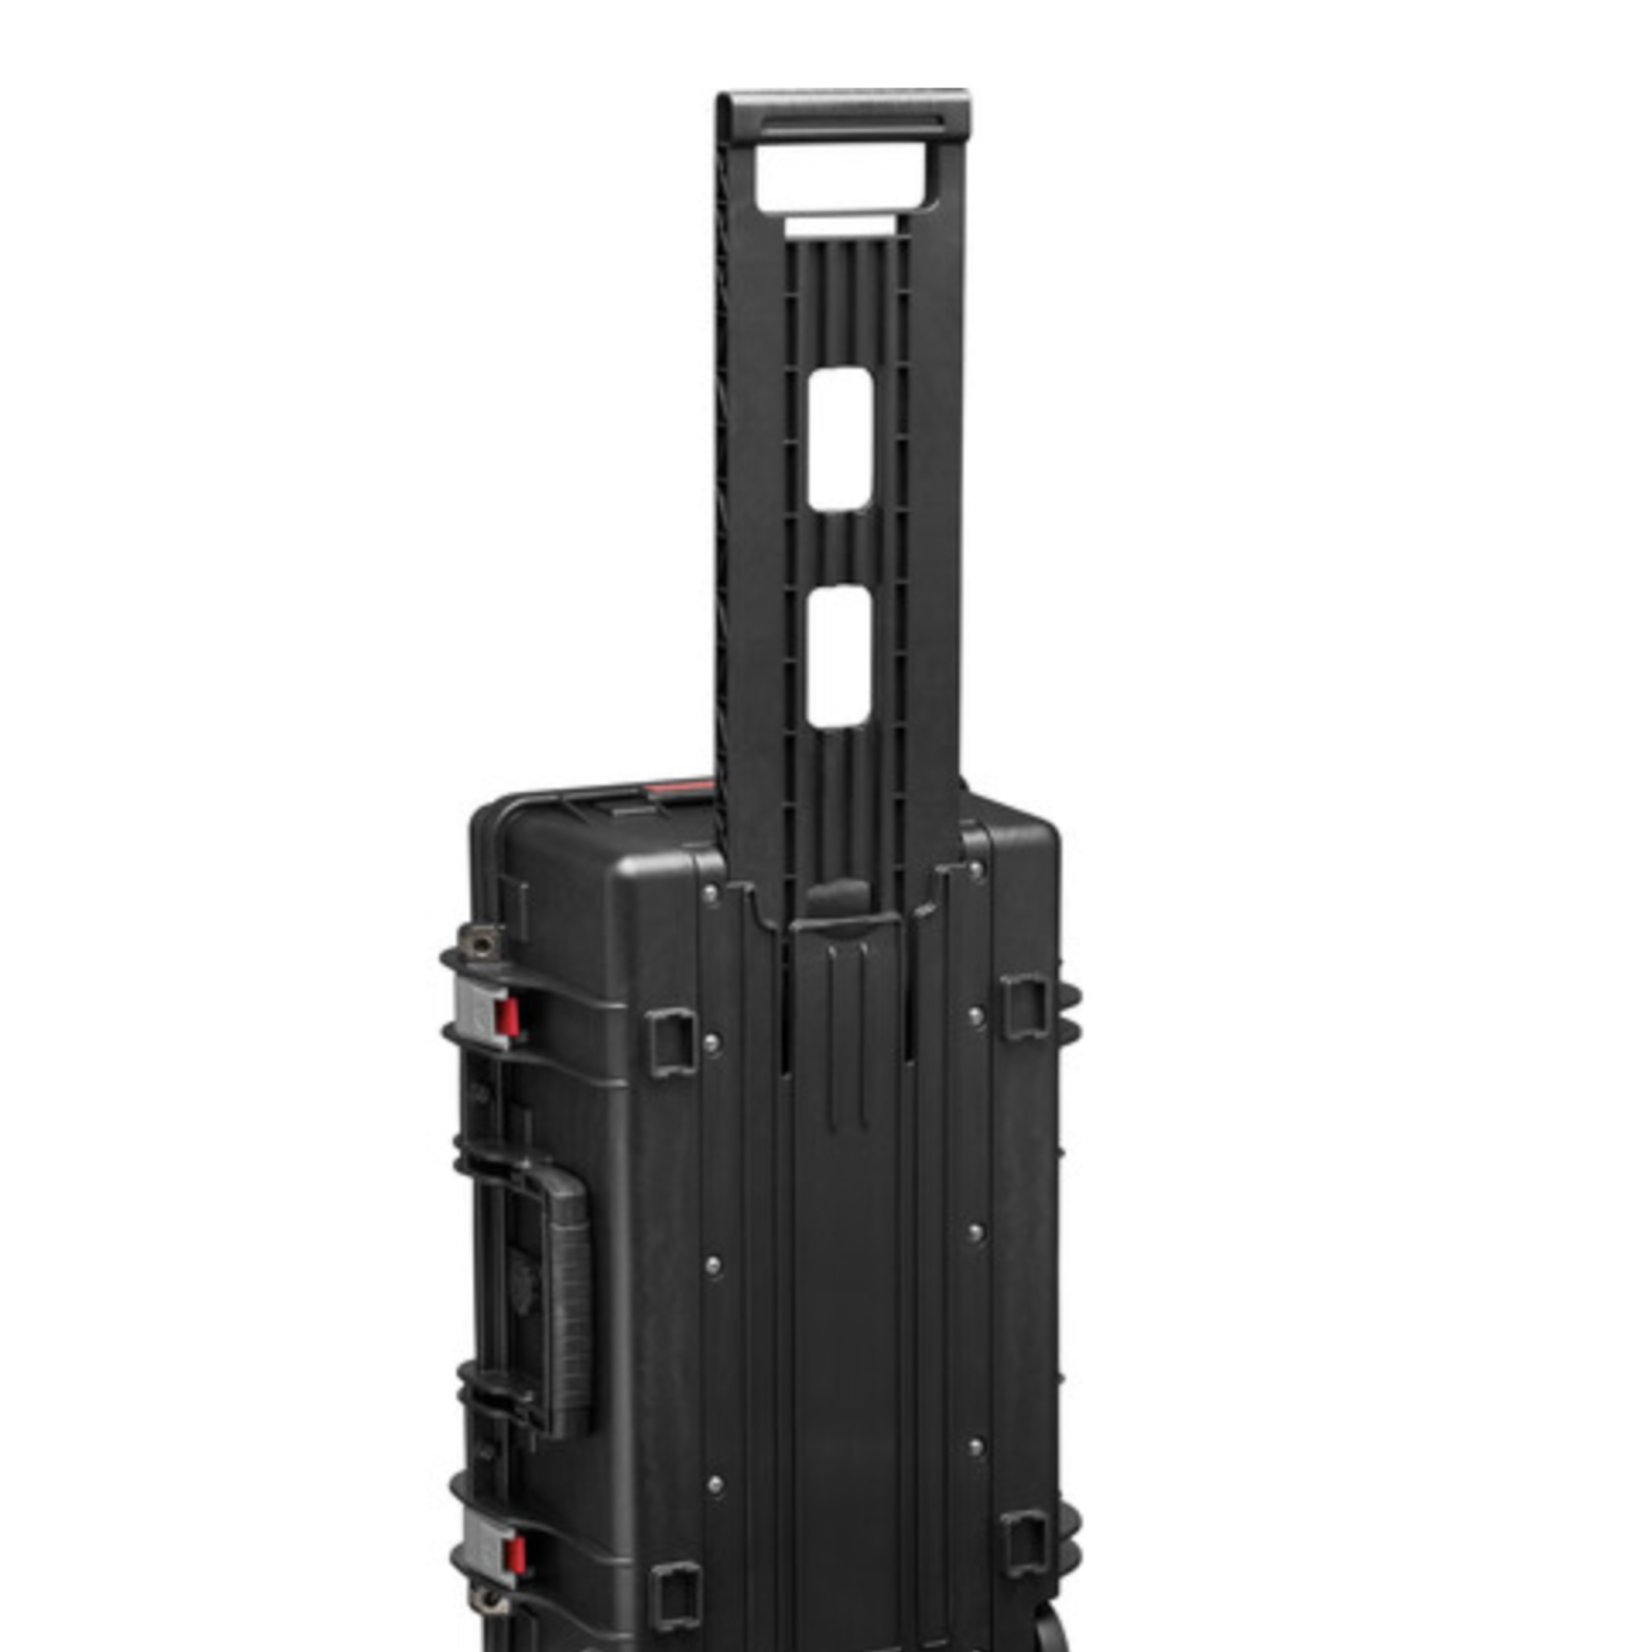 Manfrotto Manfrotto Pro Light Reloader Tough-55 High Lid Wheeled Hard Case with Foam Insert